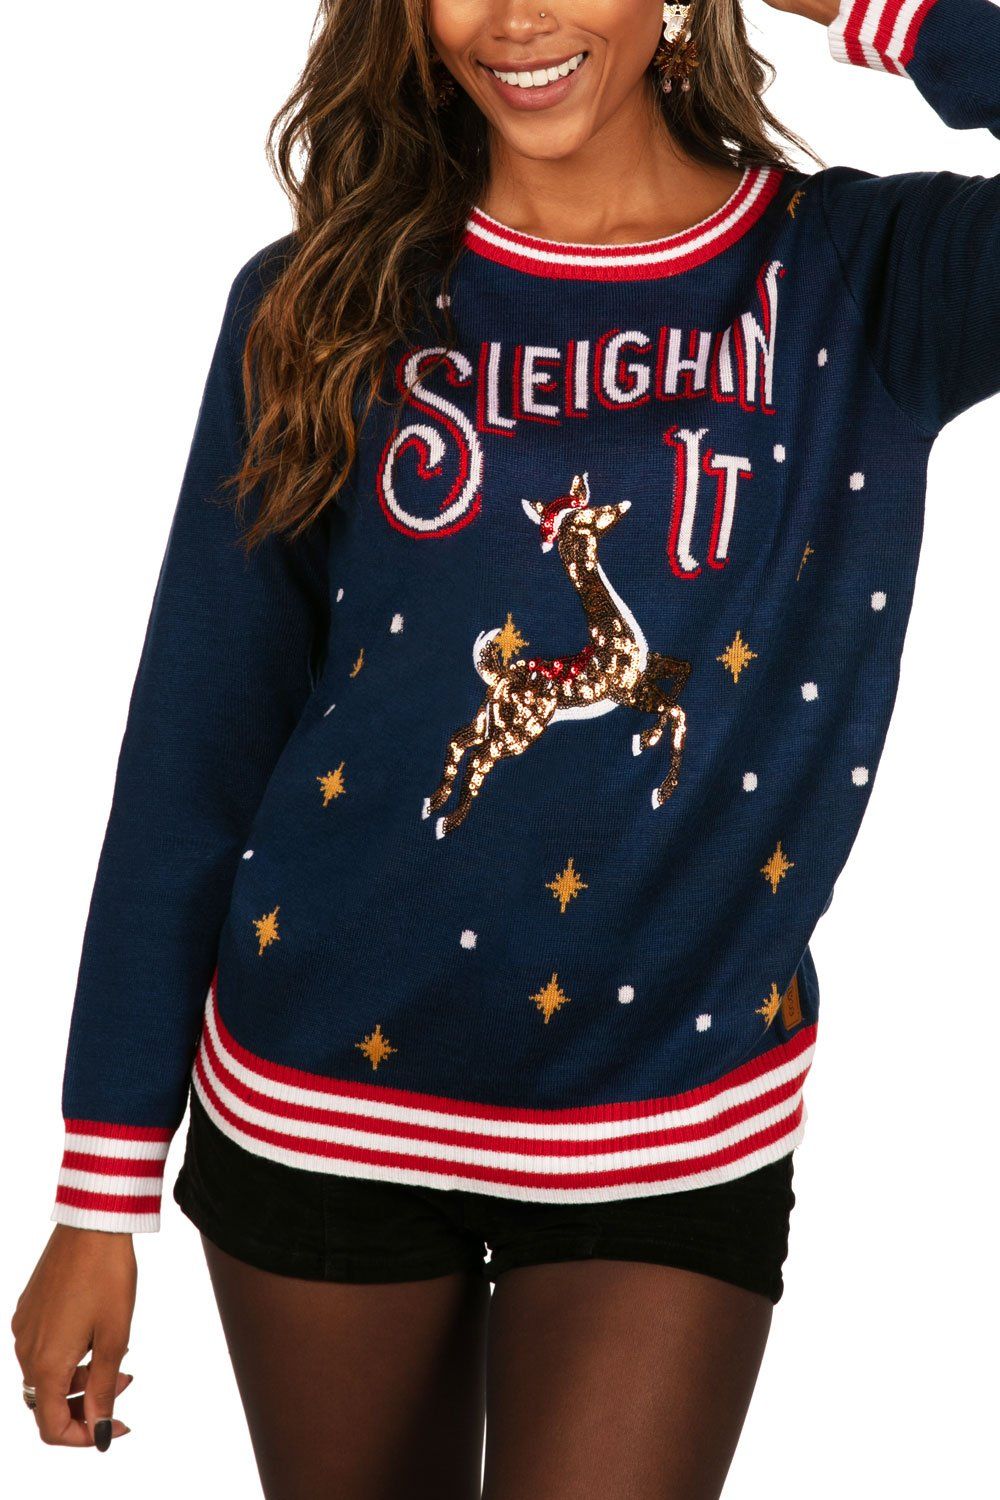 33 Cute Christmas Sweaters for Women 2021 - Dressy Holiday Sweaters